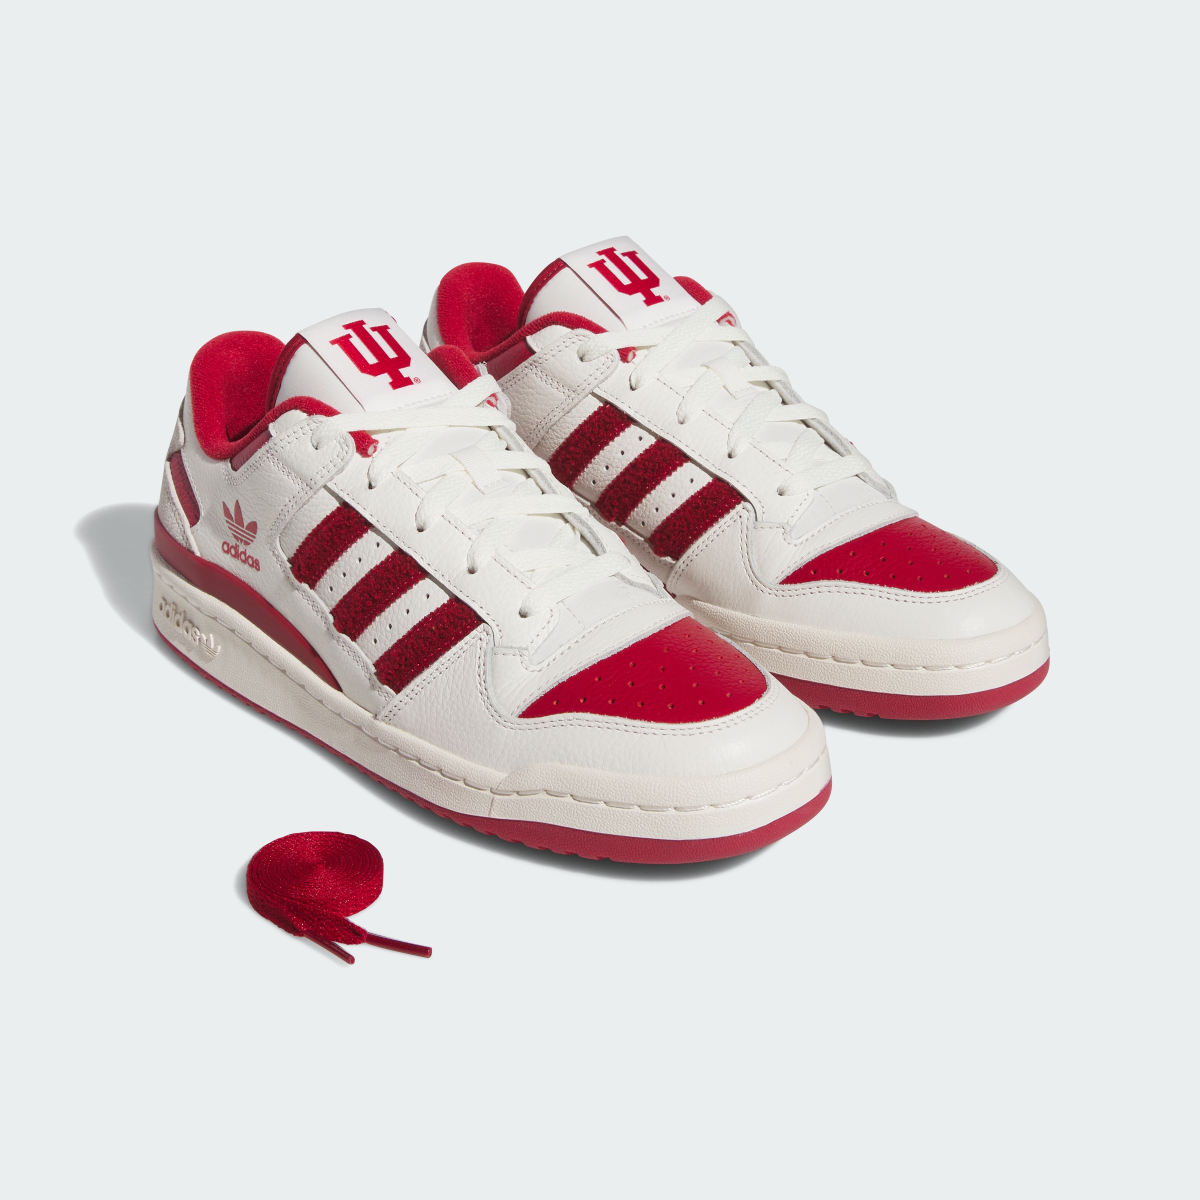 Adidas Indiana Forum Low Shoes. 8